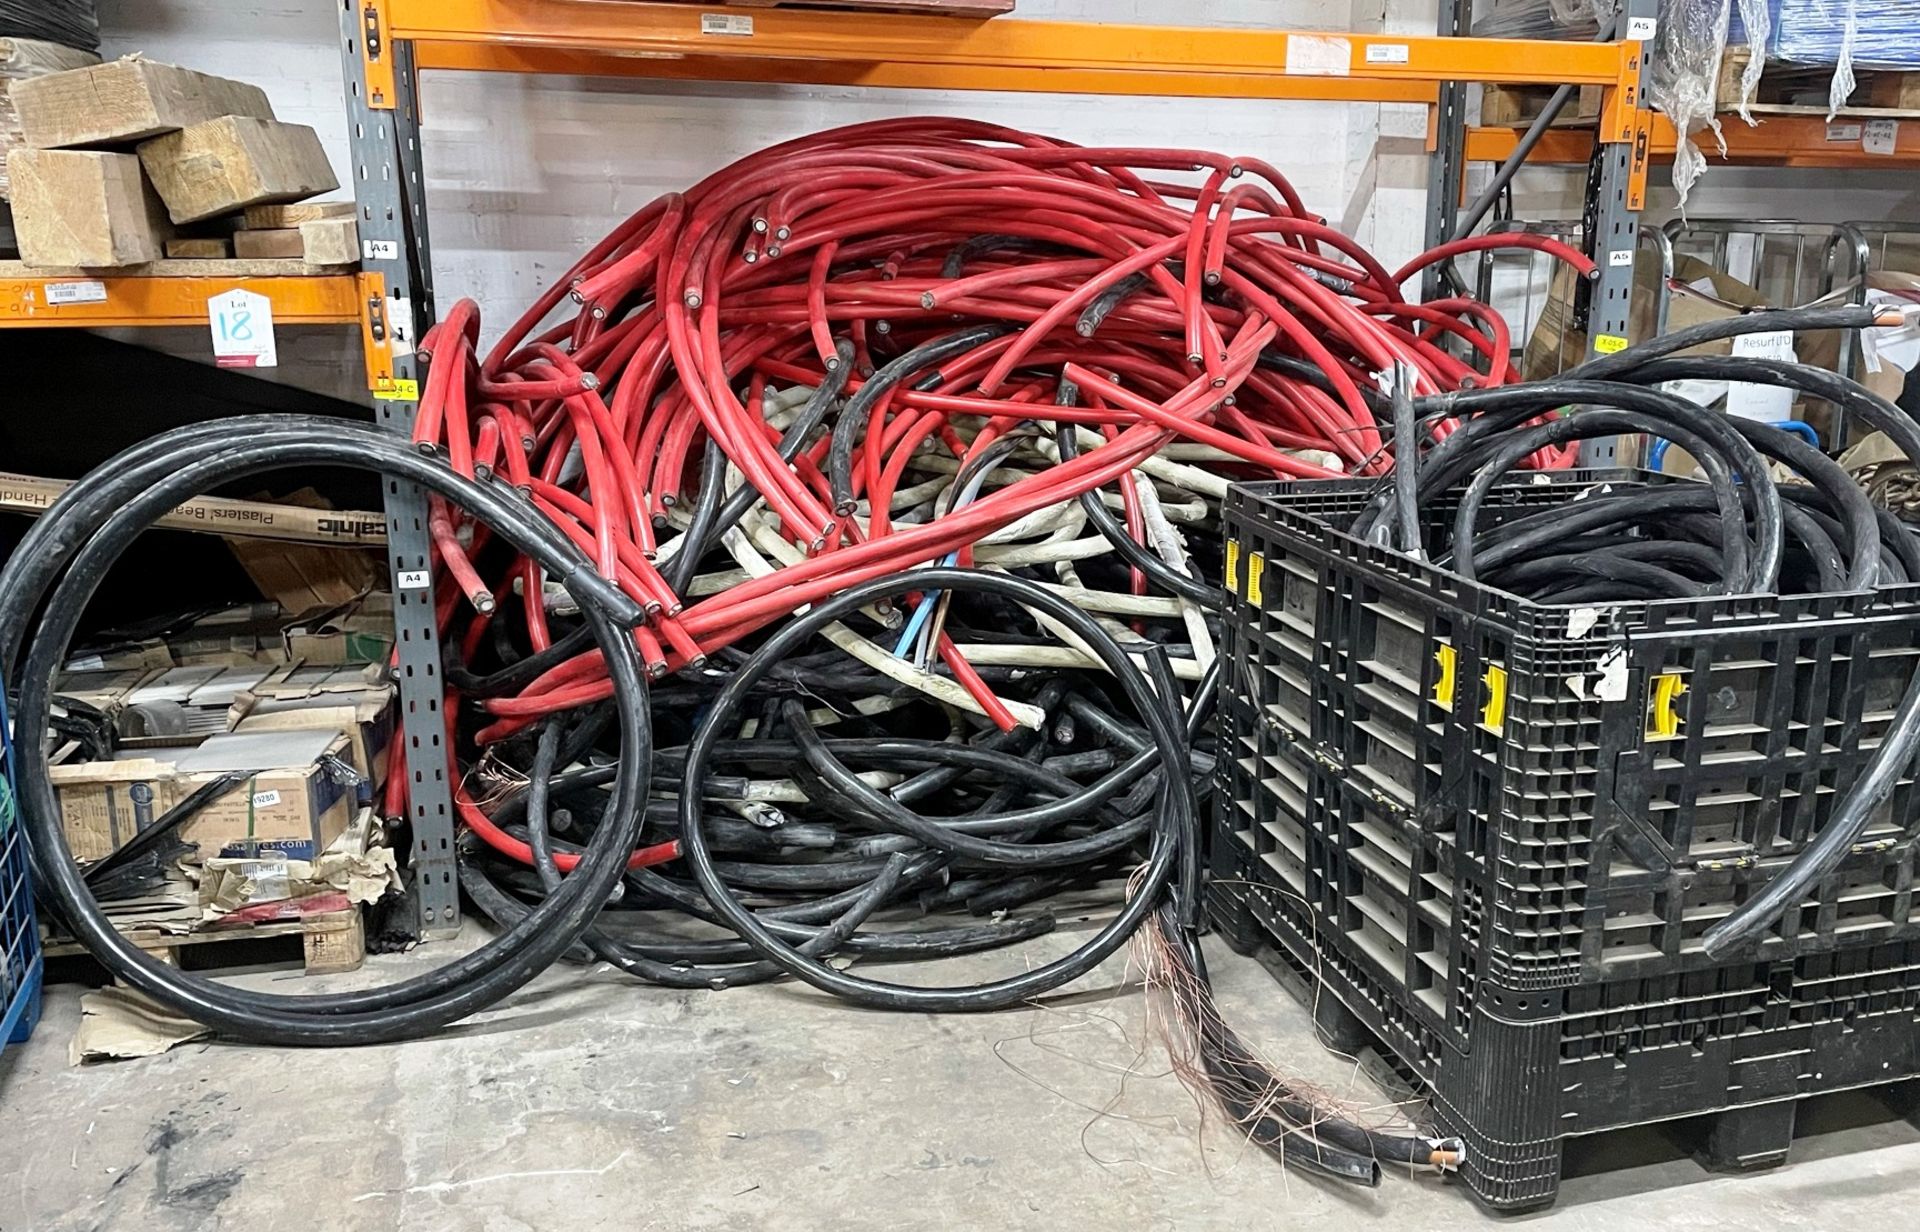 Approximately 150 x Pieces of Cut Various Single/Three/Four Core Cable - Weight 1.2T + - For Scrap/R